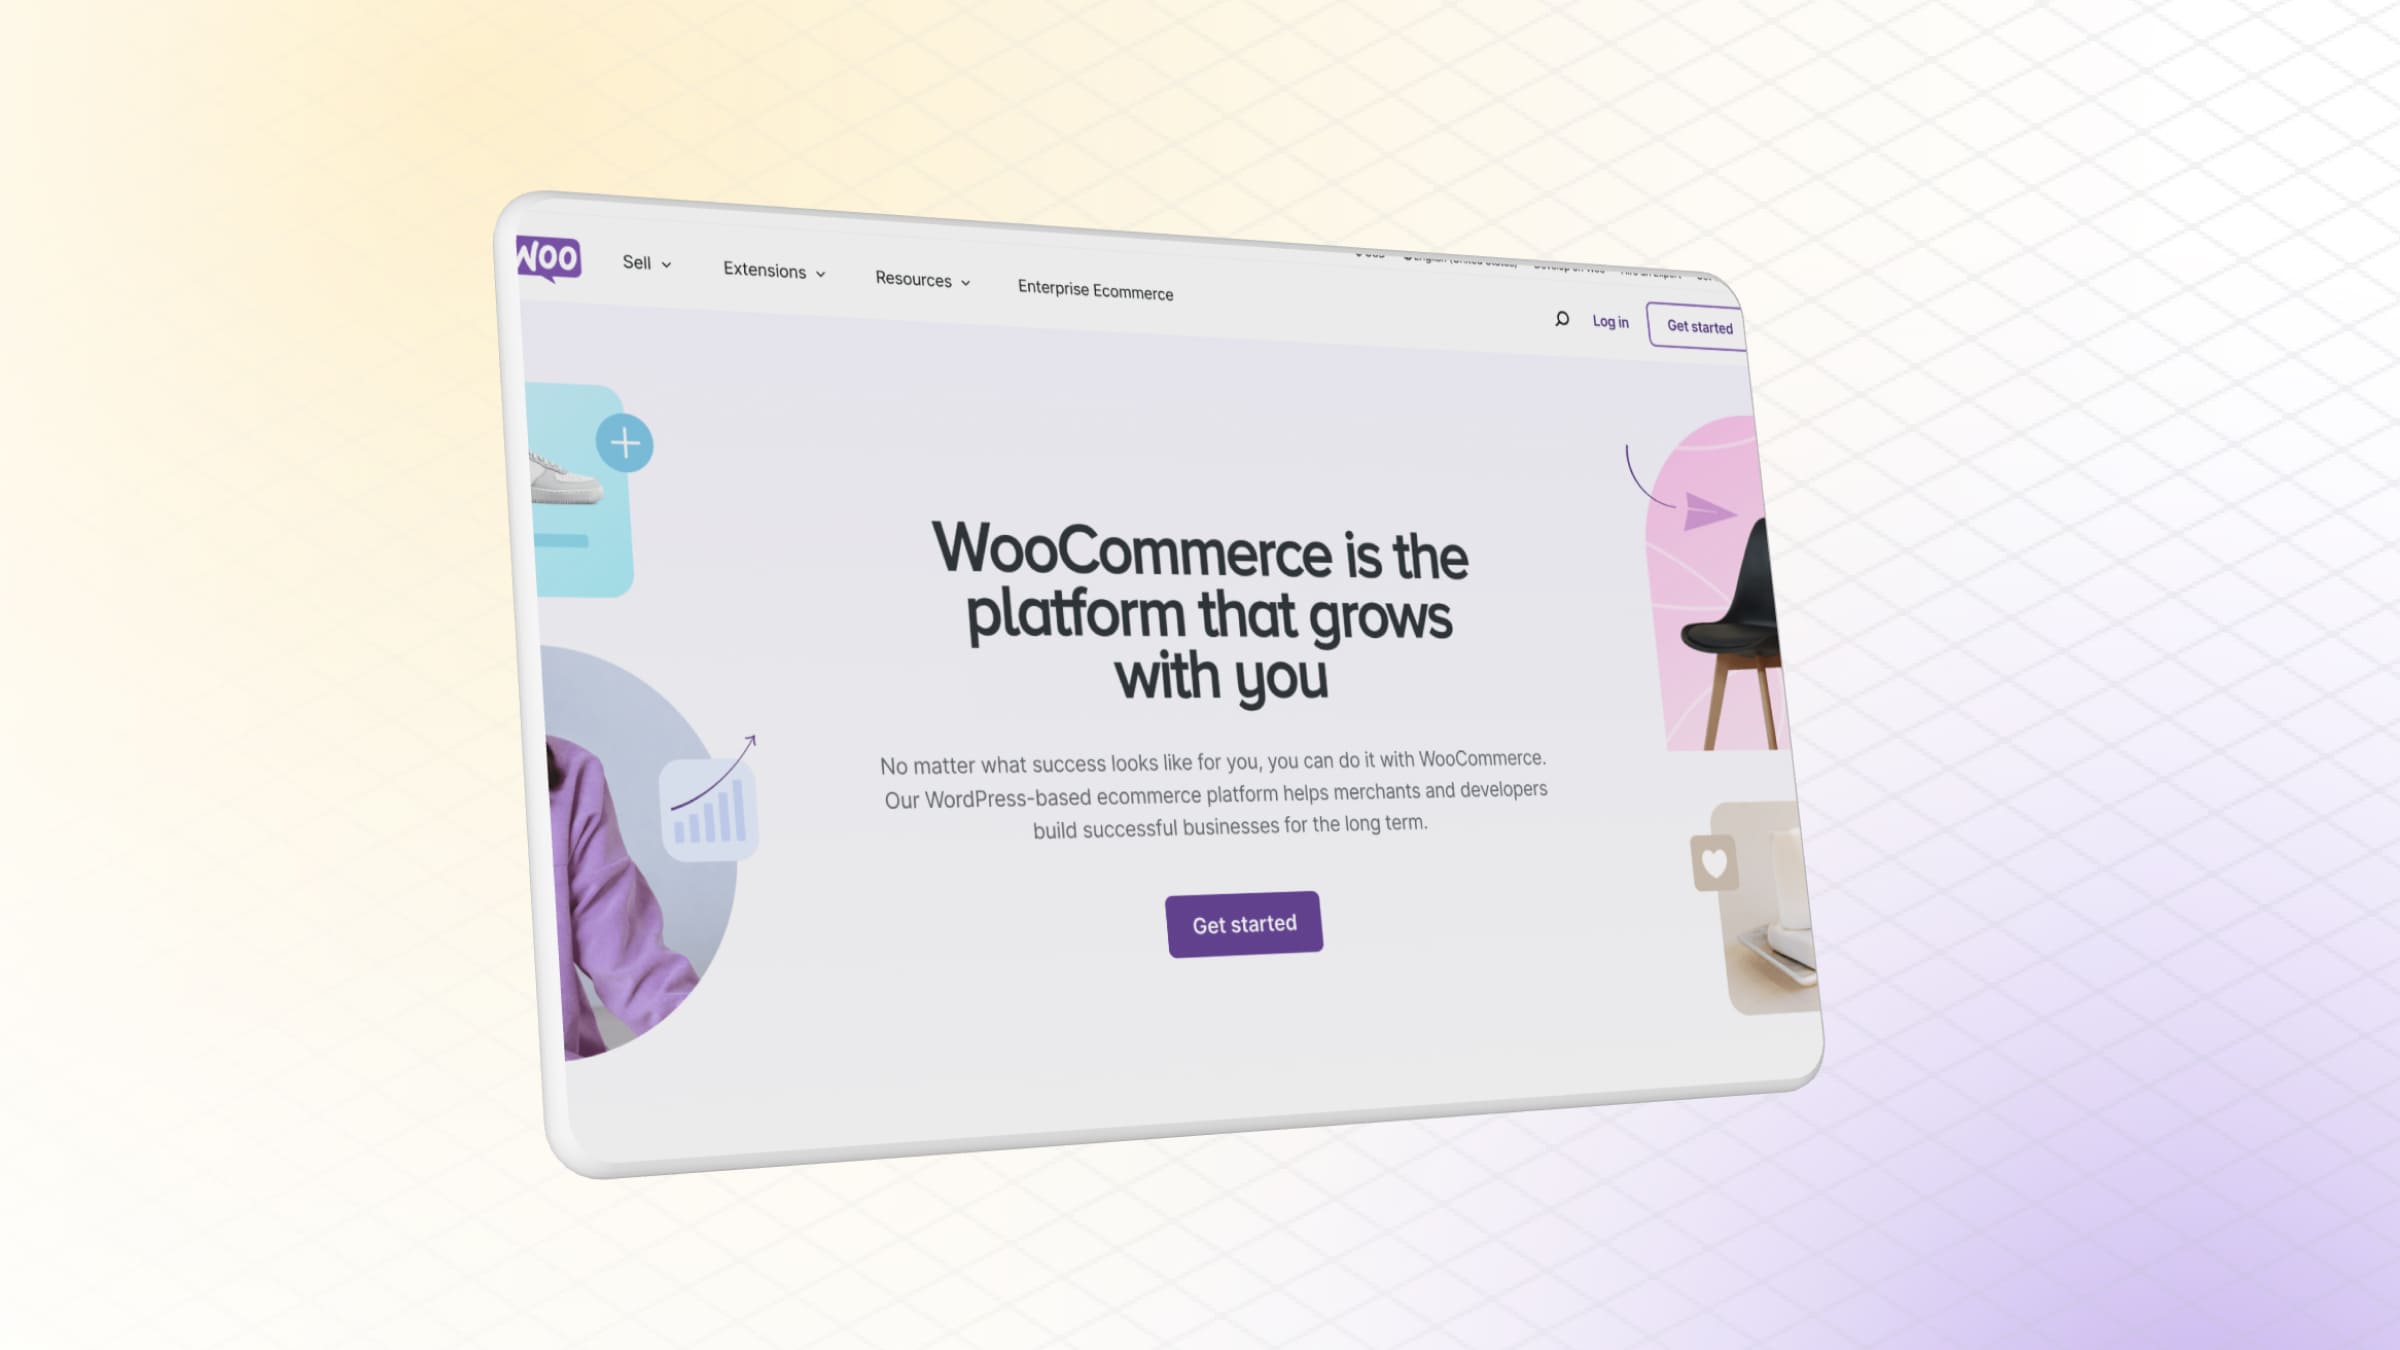 WooCommerce is a CMS for an online store powered by WordPress.